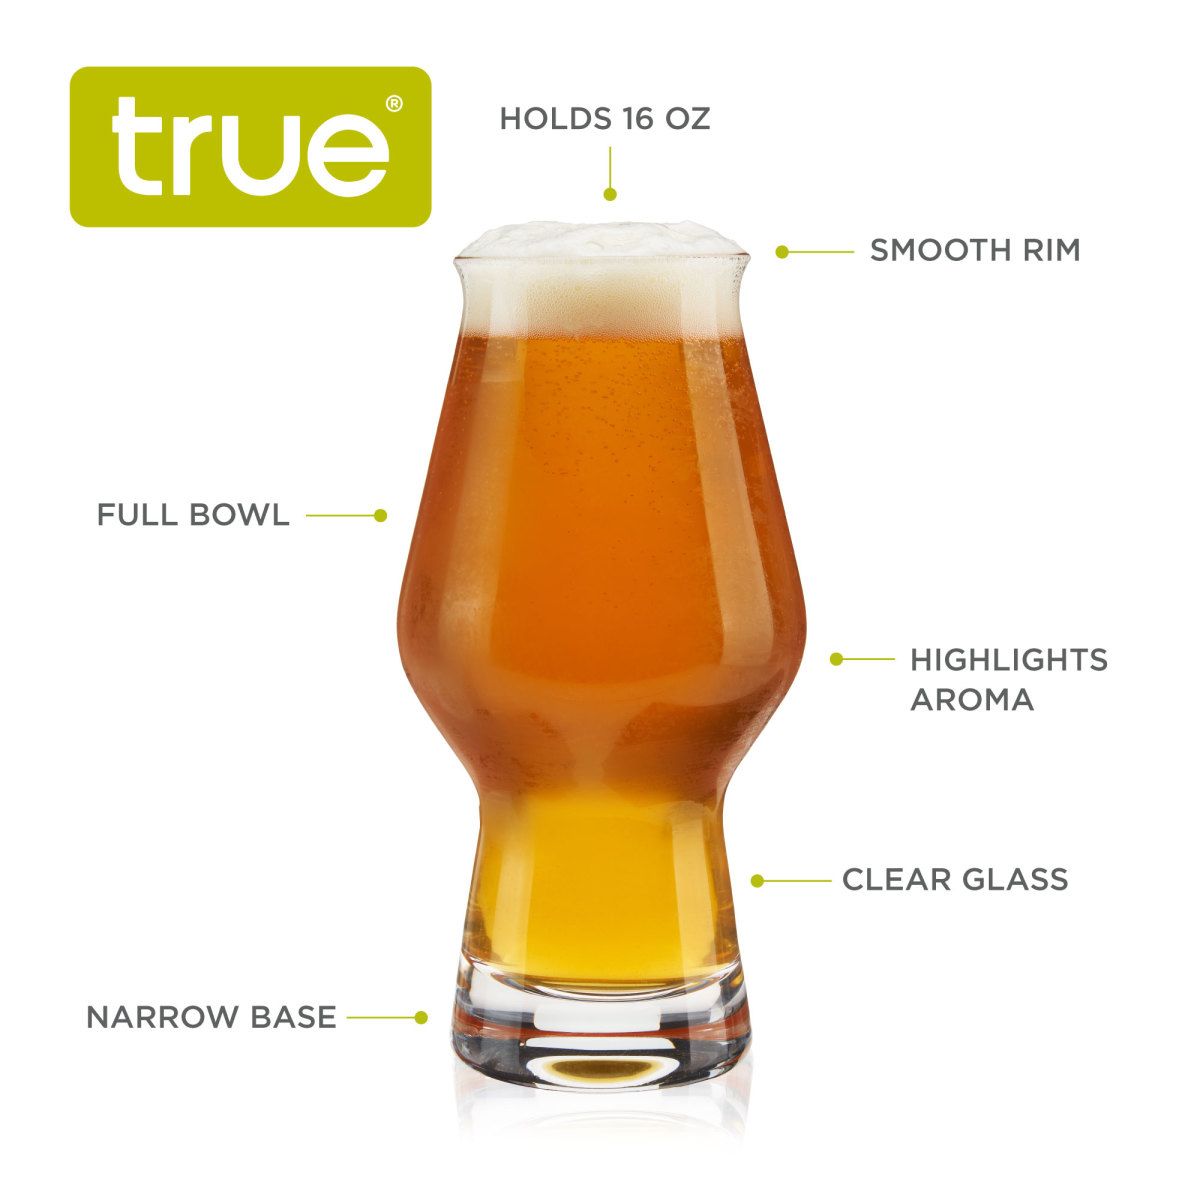 True IPA Glasses, Beer Pint Glasses, Craft Beer Glassware, IPA Glass Set,  Set of 4, 16 Ounce Capacity, for Stouts, Pilsners, IPAs